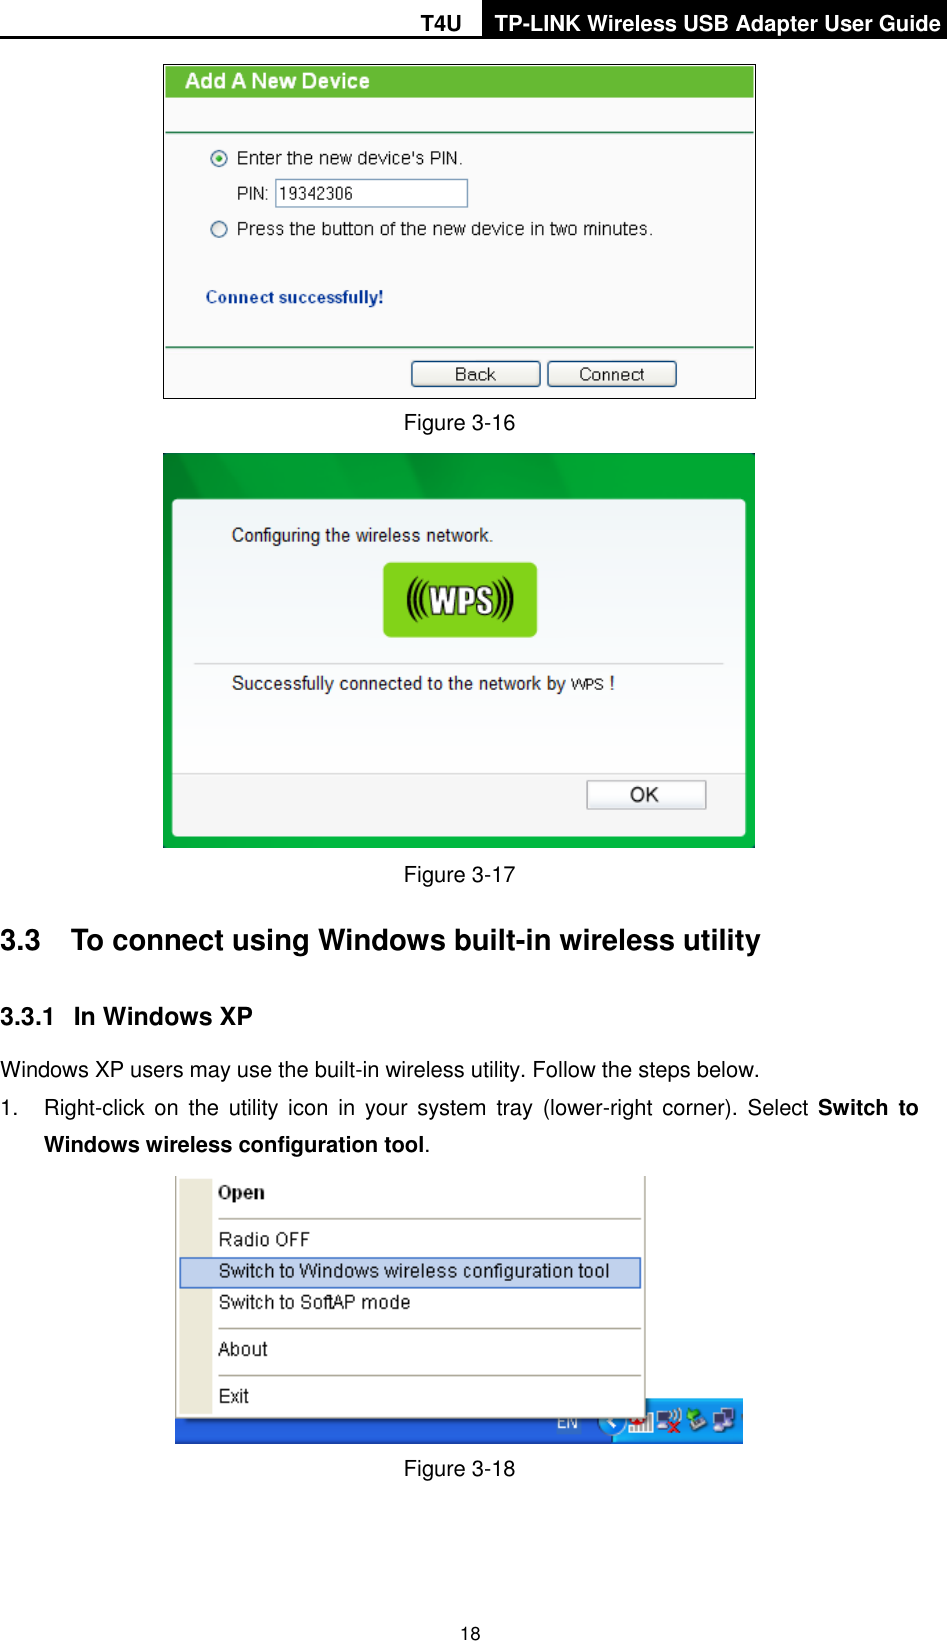 T4U TP-LINK Wireless USB Adapter User Guide   18  Figure 3-16  Figure 3-17 3.3  To connect using Windows built-in wireless utility 3.3.1  In Windows XP Windows XP users may use the built-in wireless utility. Follow the steps below. 1.  Right-click on  the  utility icon  in  your system tray (lower-right corner). Select Switch to Windows wireless configuration tool.    Figure 3-18 